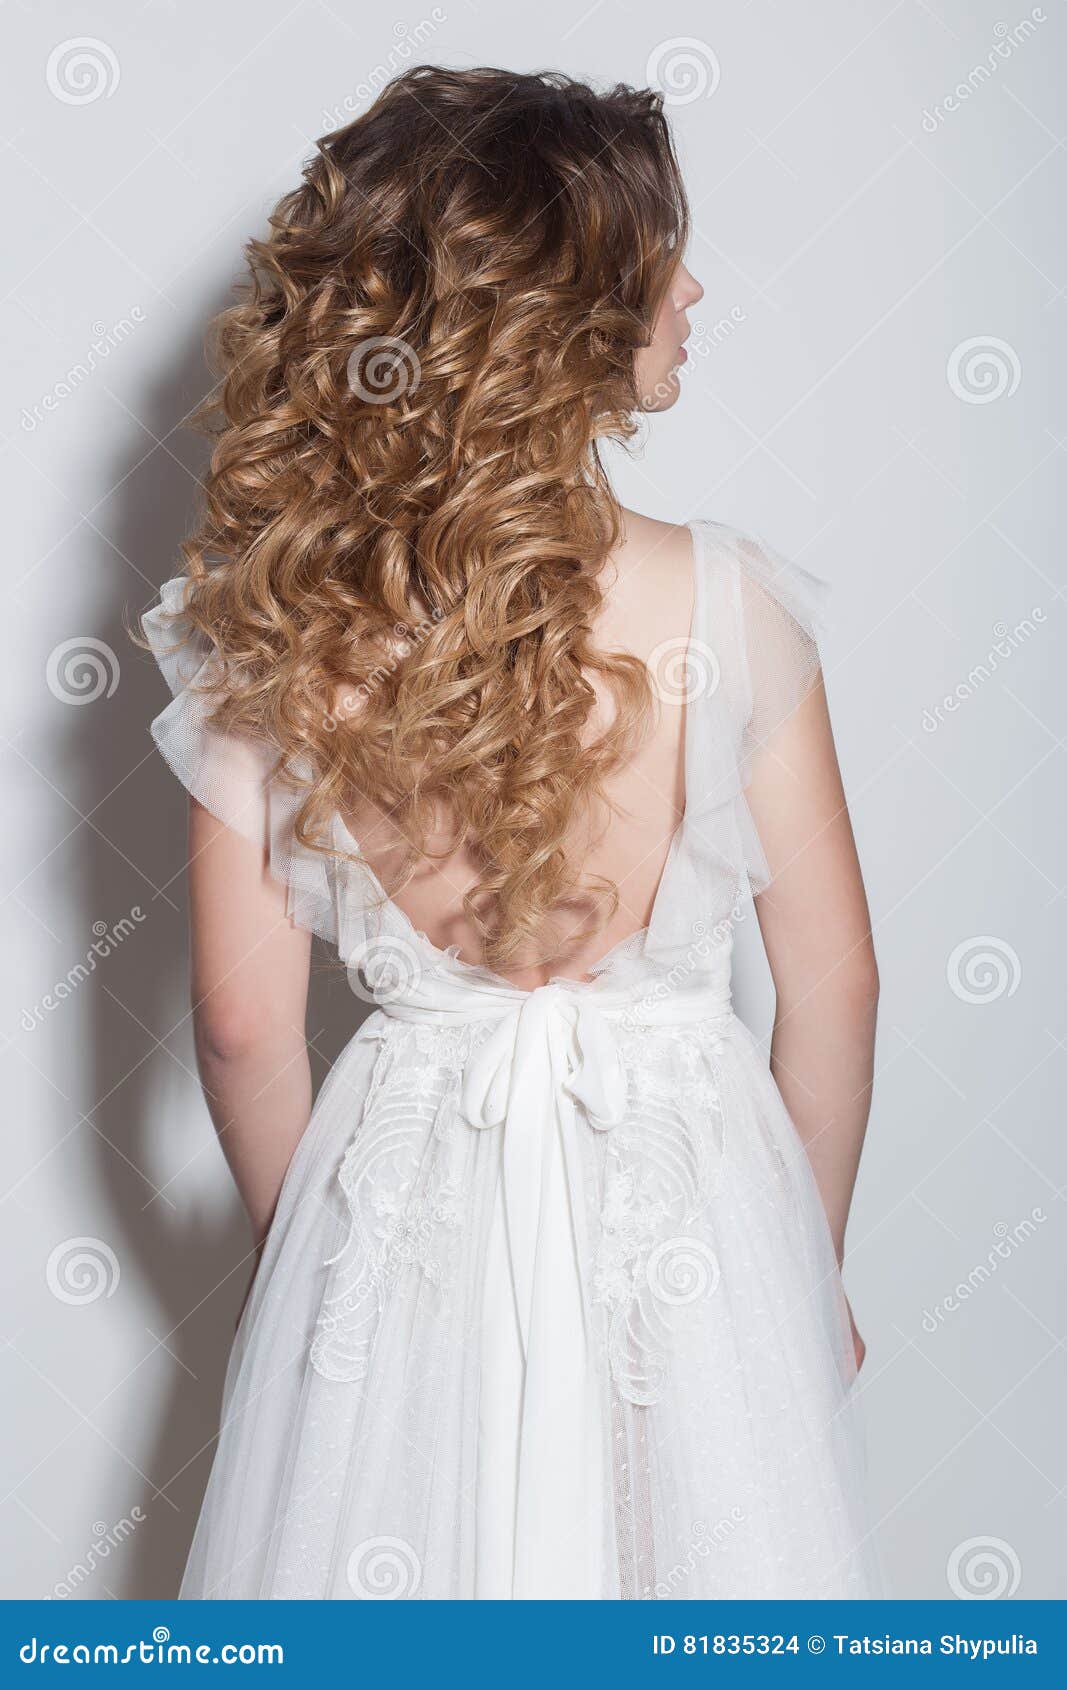 7 Bride Hair Styles For Your Wedding Day